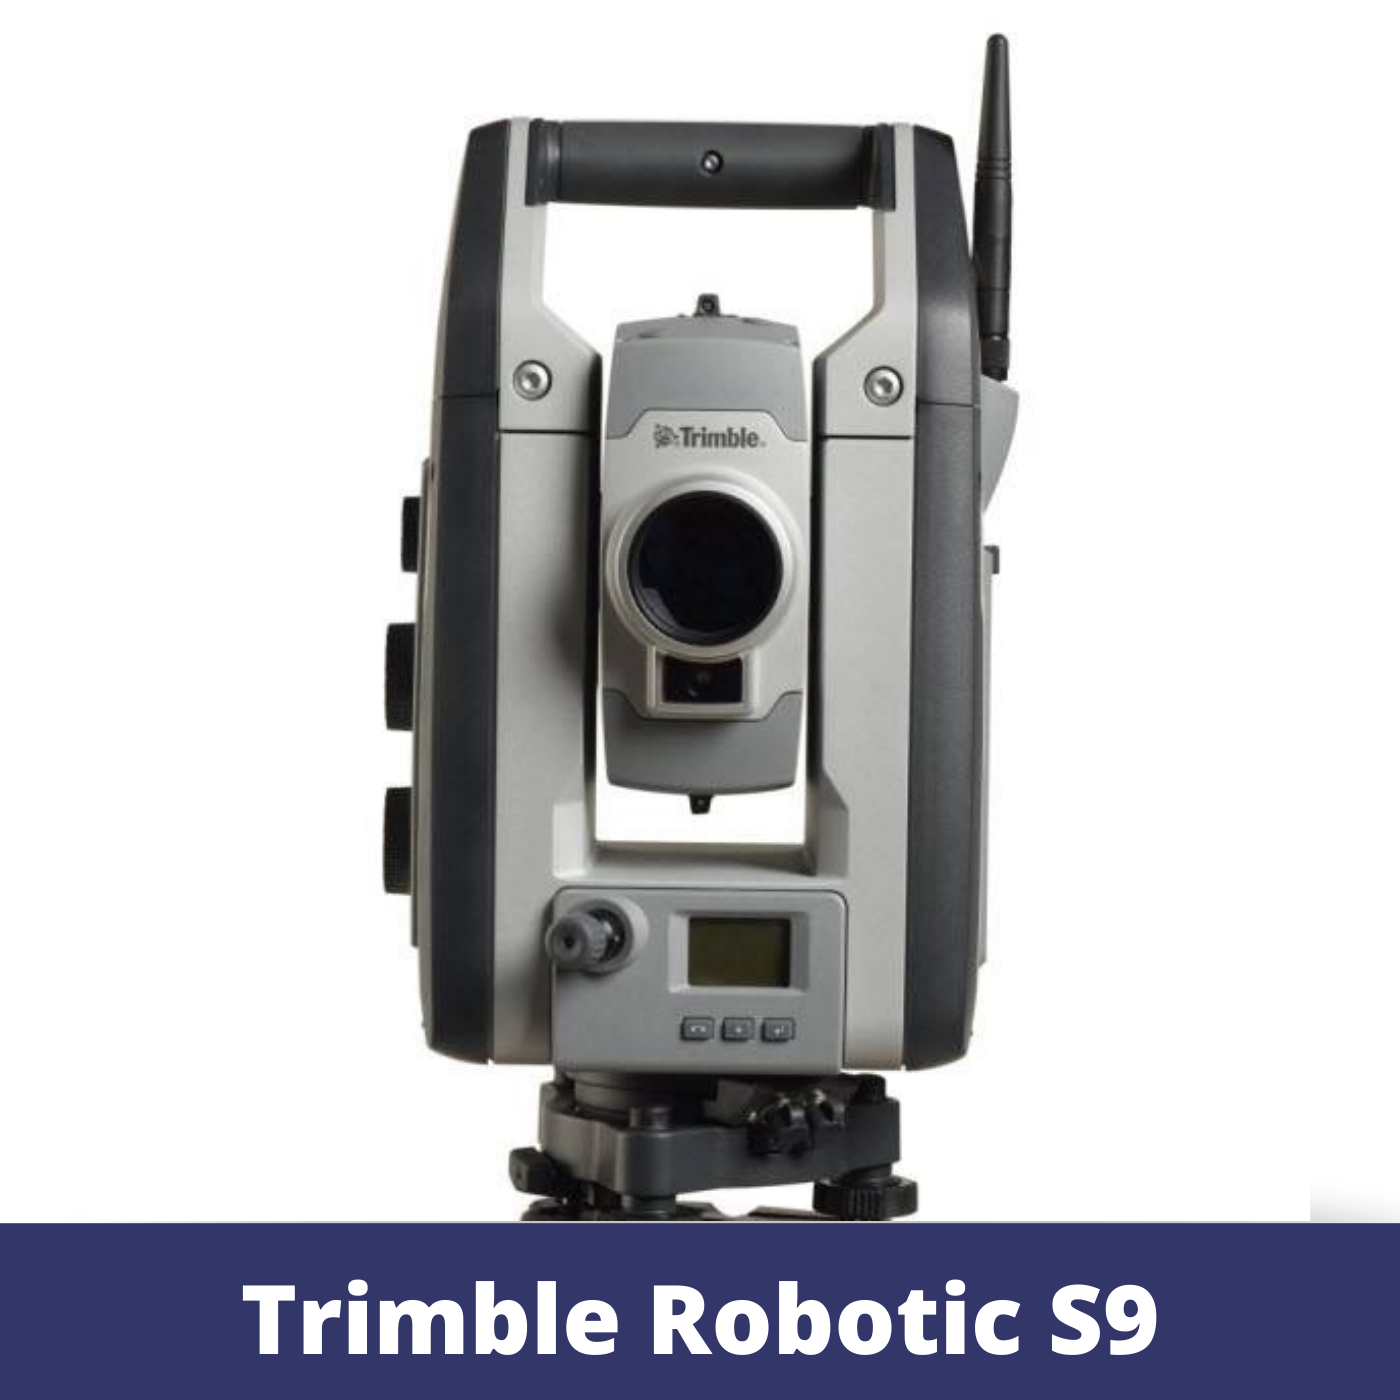 a trimble robotic s9 is shown on a white background